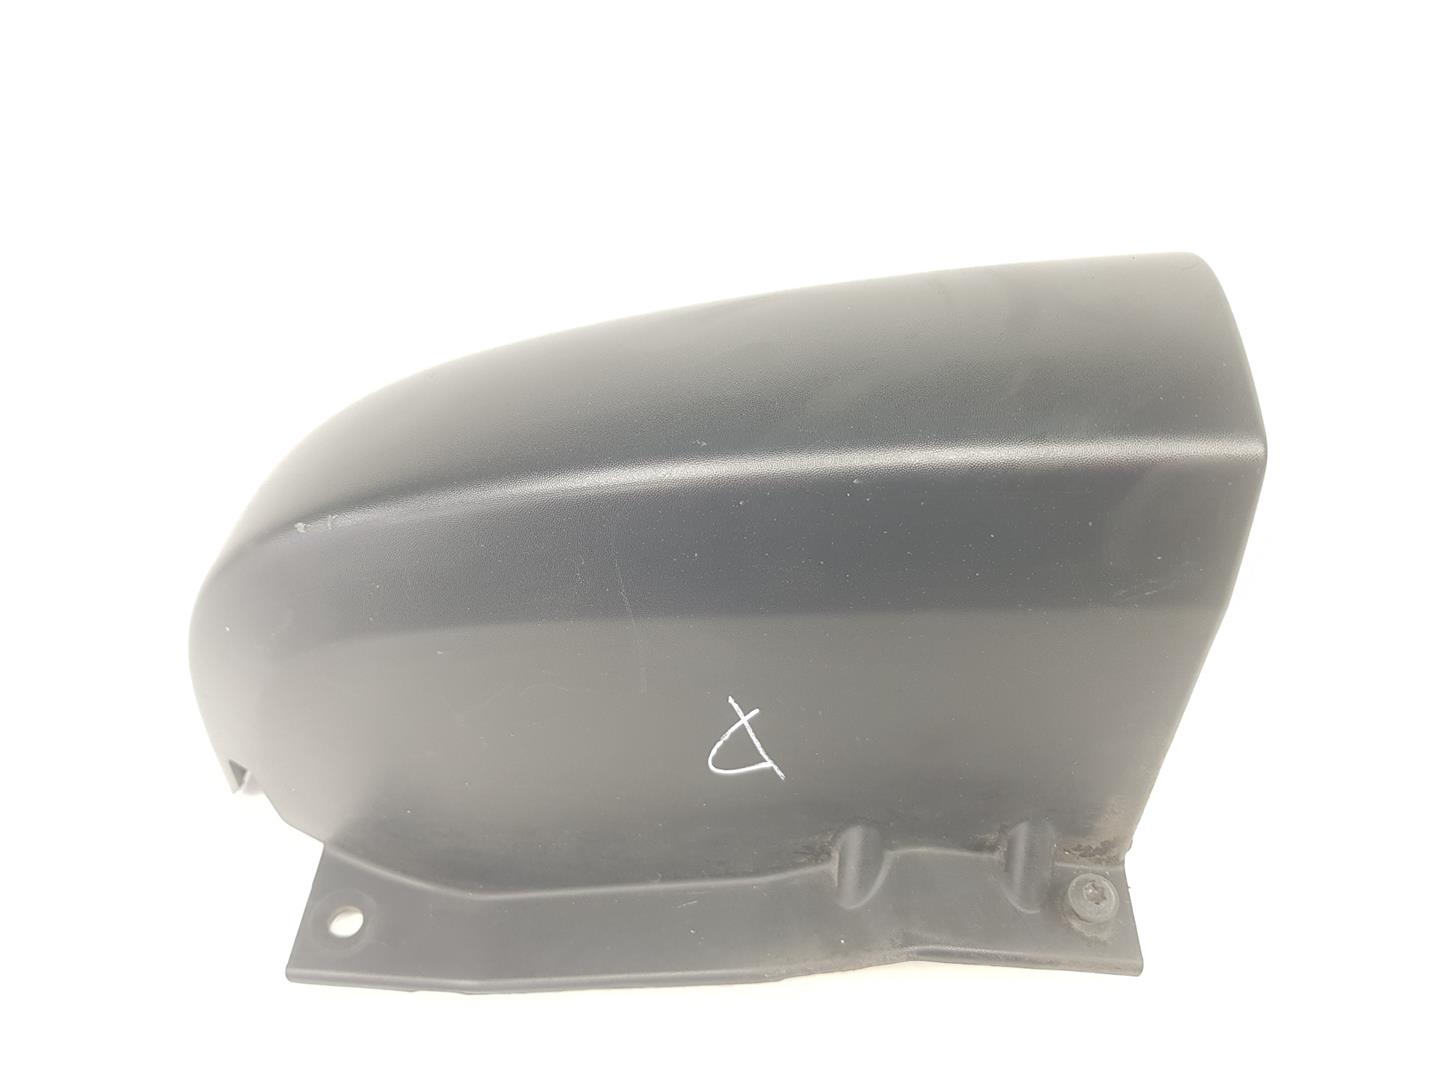 RENAULT Trafic 2 generation (2001-2015) Other Interior Parts 903903513R, 903903513R 24230394